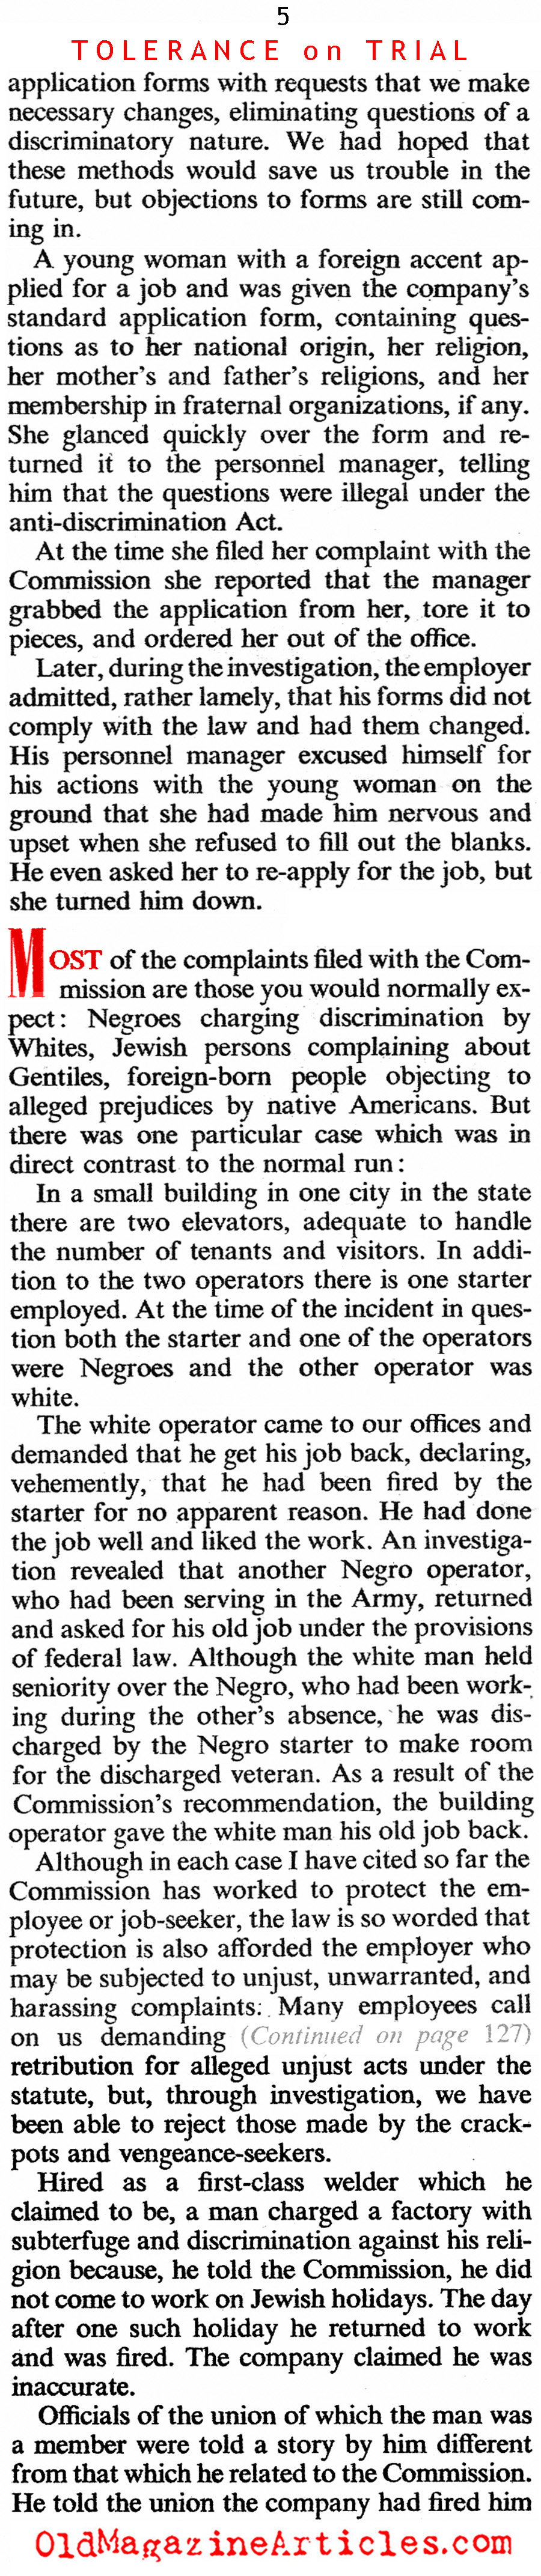 Confronting the Bigots (The American Magazine, 1946)